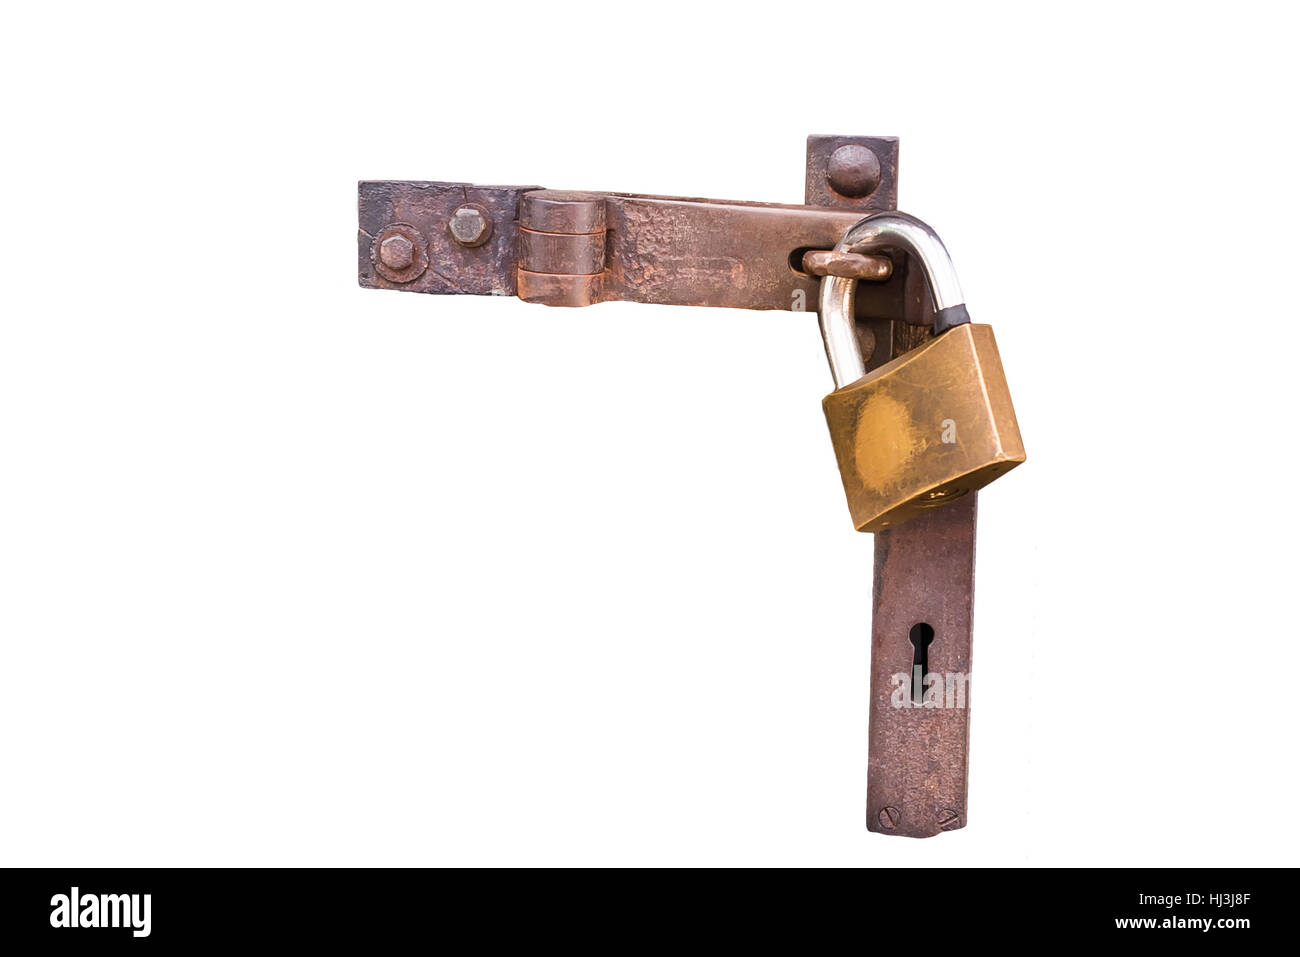 Close up view of a padlock with an old metal hasp and staple on white isolated background Stock Photo